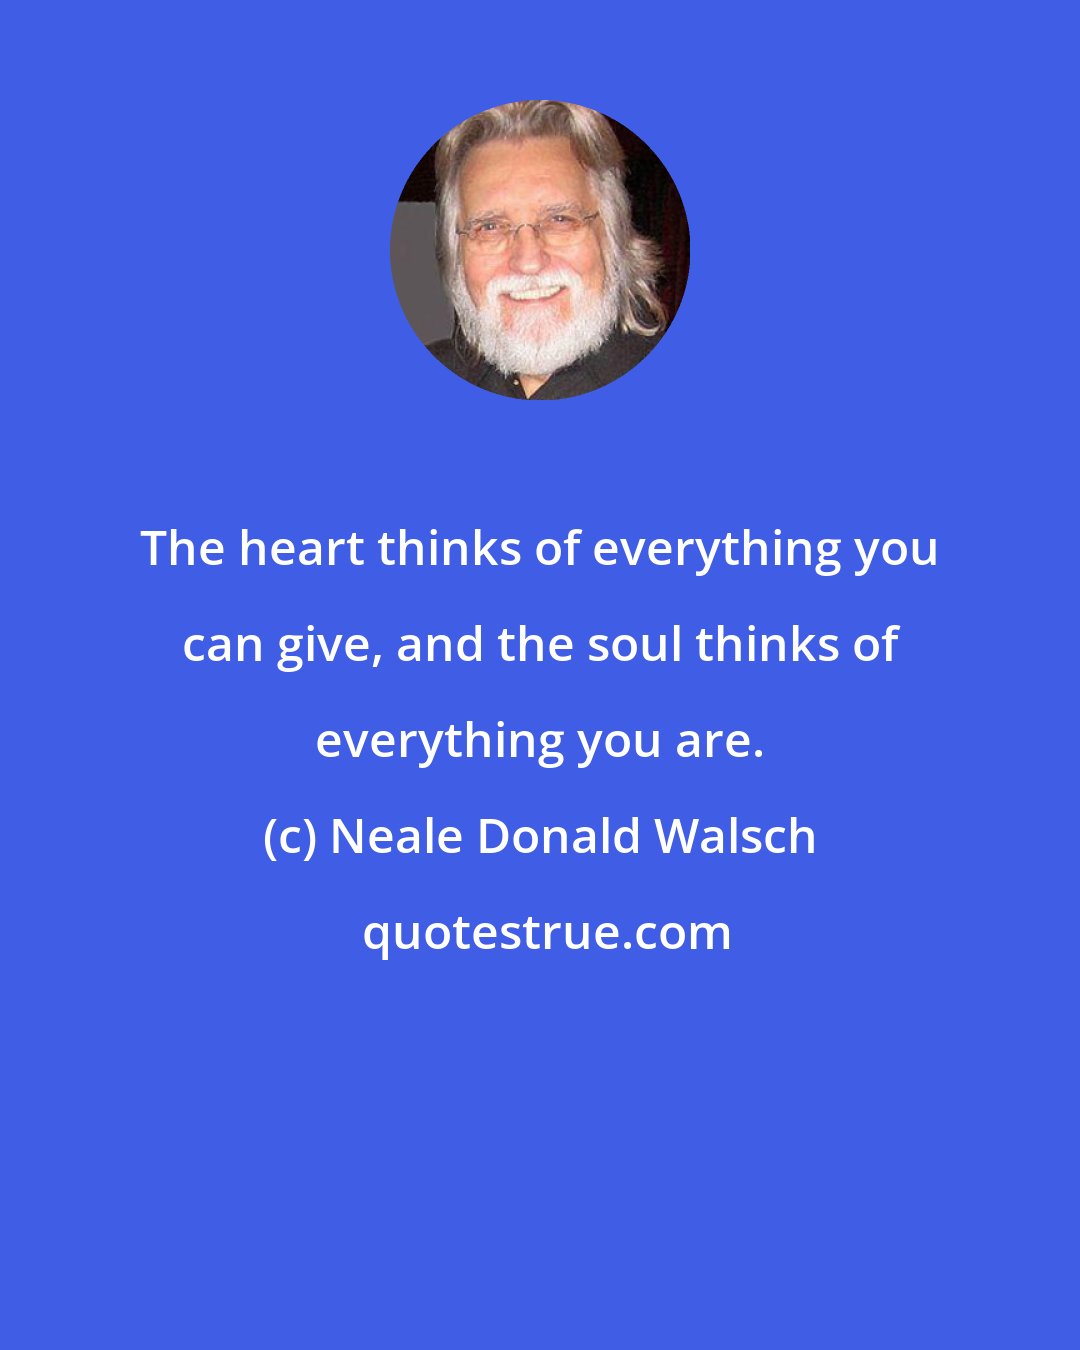 Neale Donald Walsch: The heart thinks of everything you can give, and the soul thinks of everything you are.